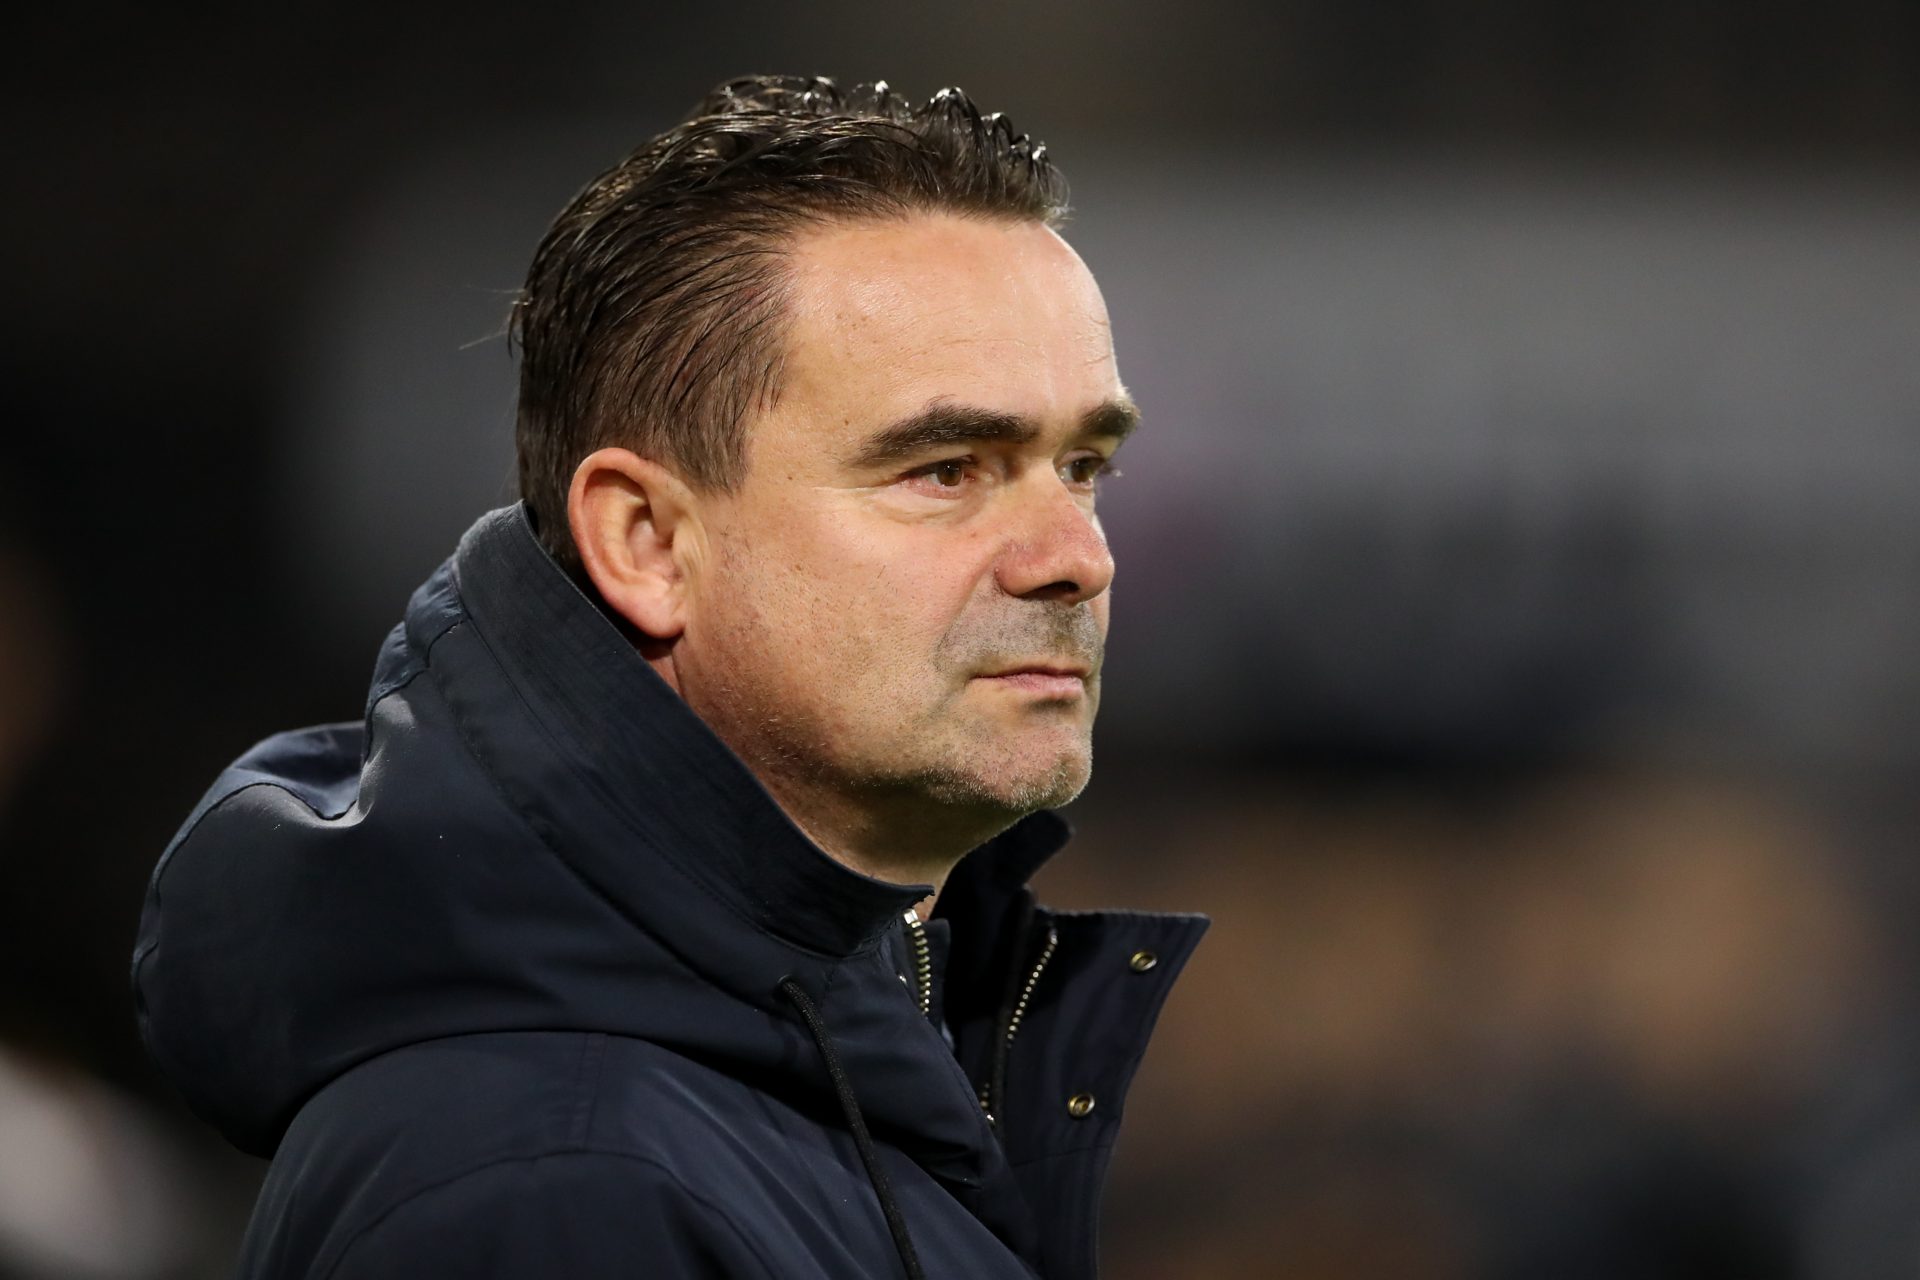 Explicit images, a heart attack and a worldwide ban – the wild life of Marc Overmars